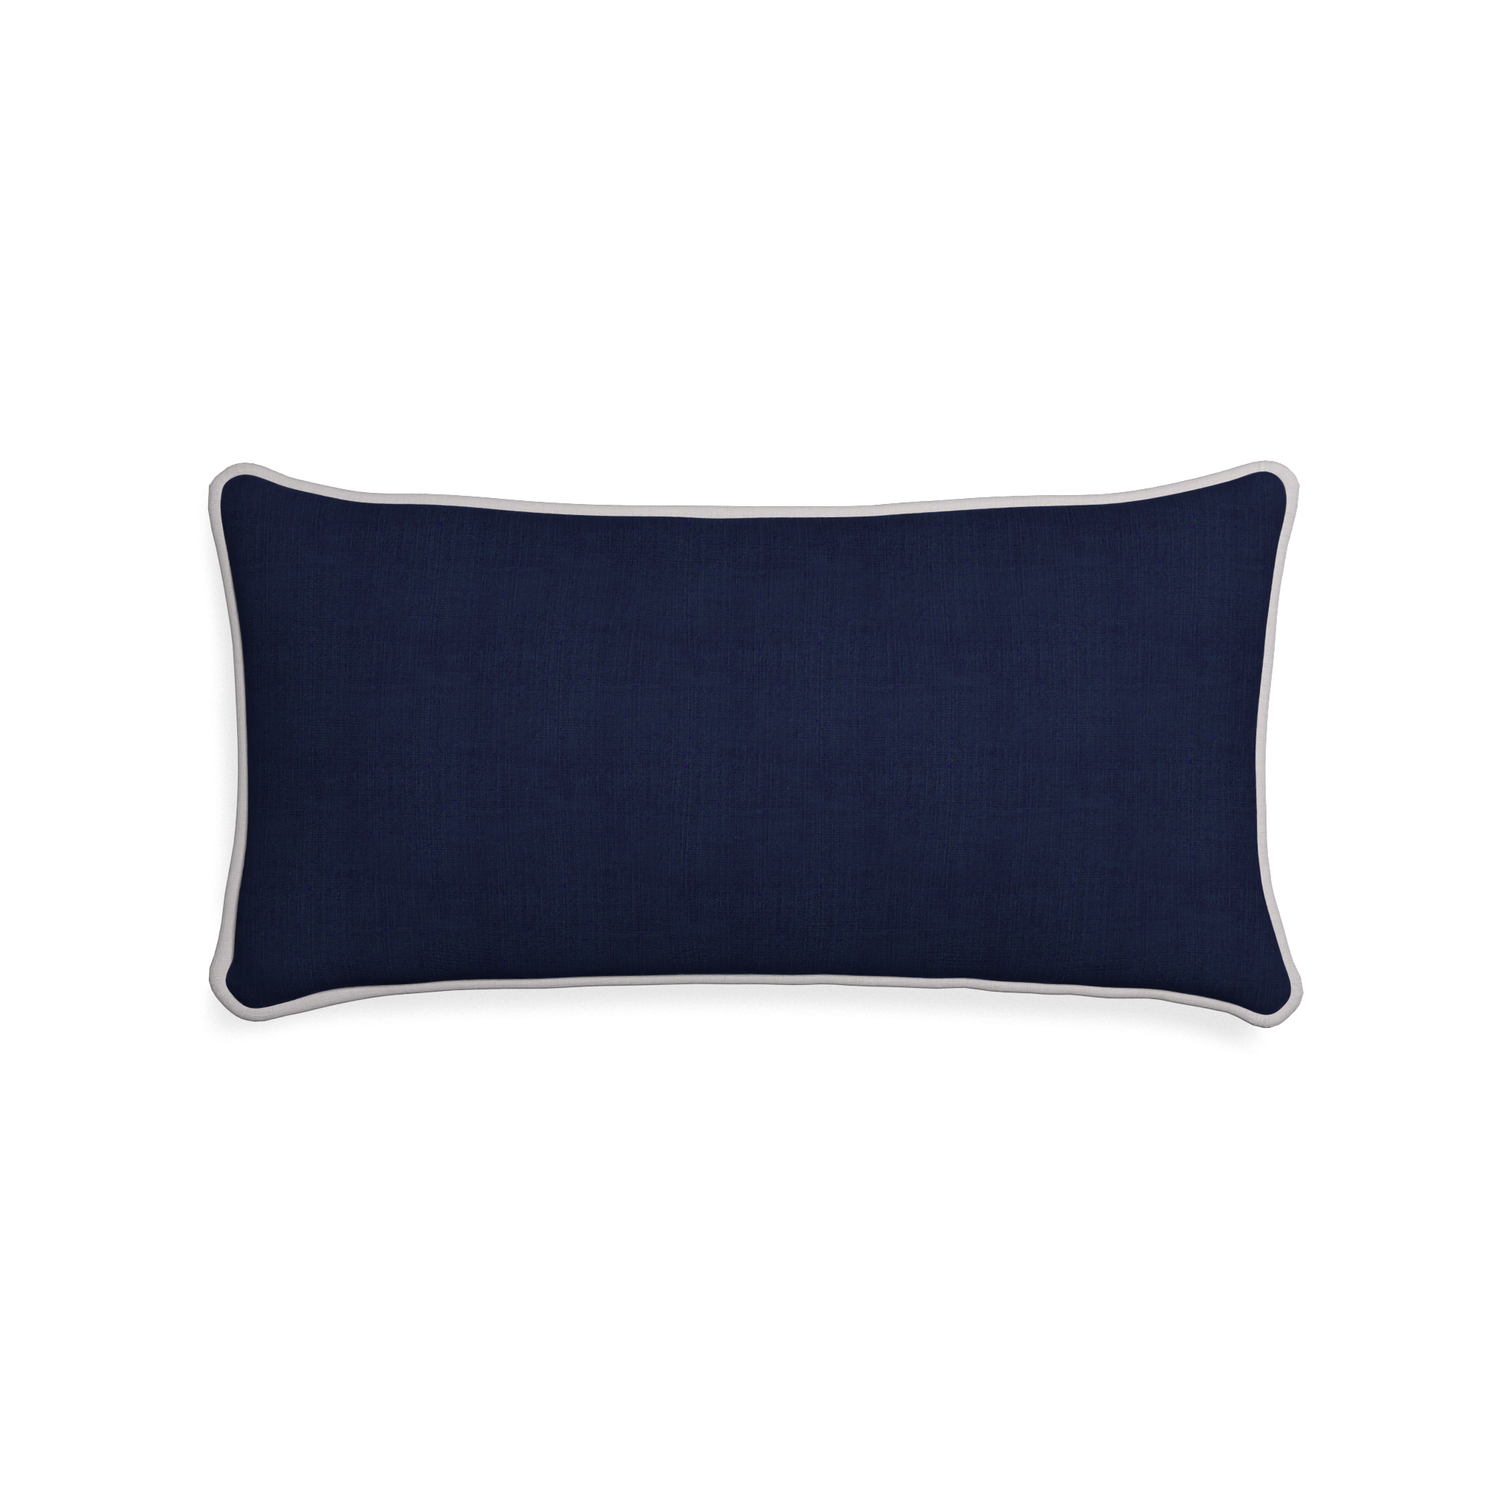 Midi-lumbar midnight custom navy bluepillow with pebble piping on white background